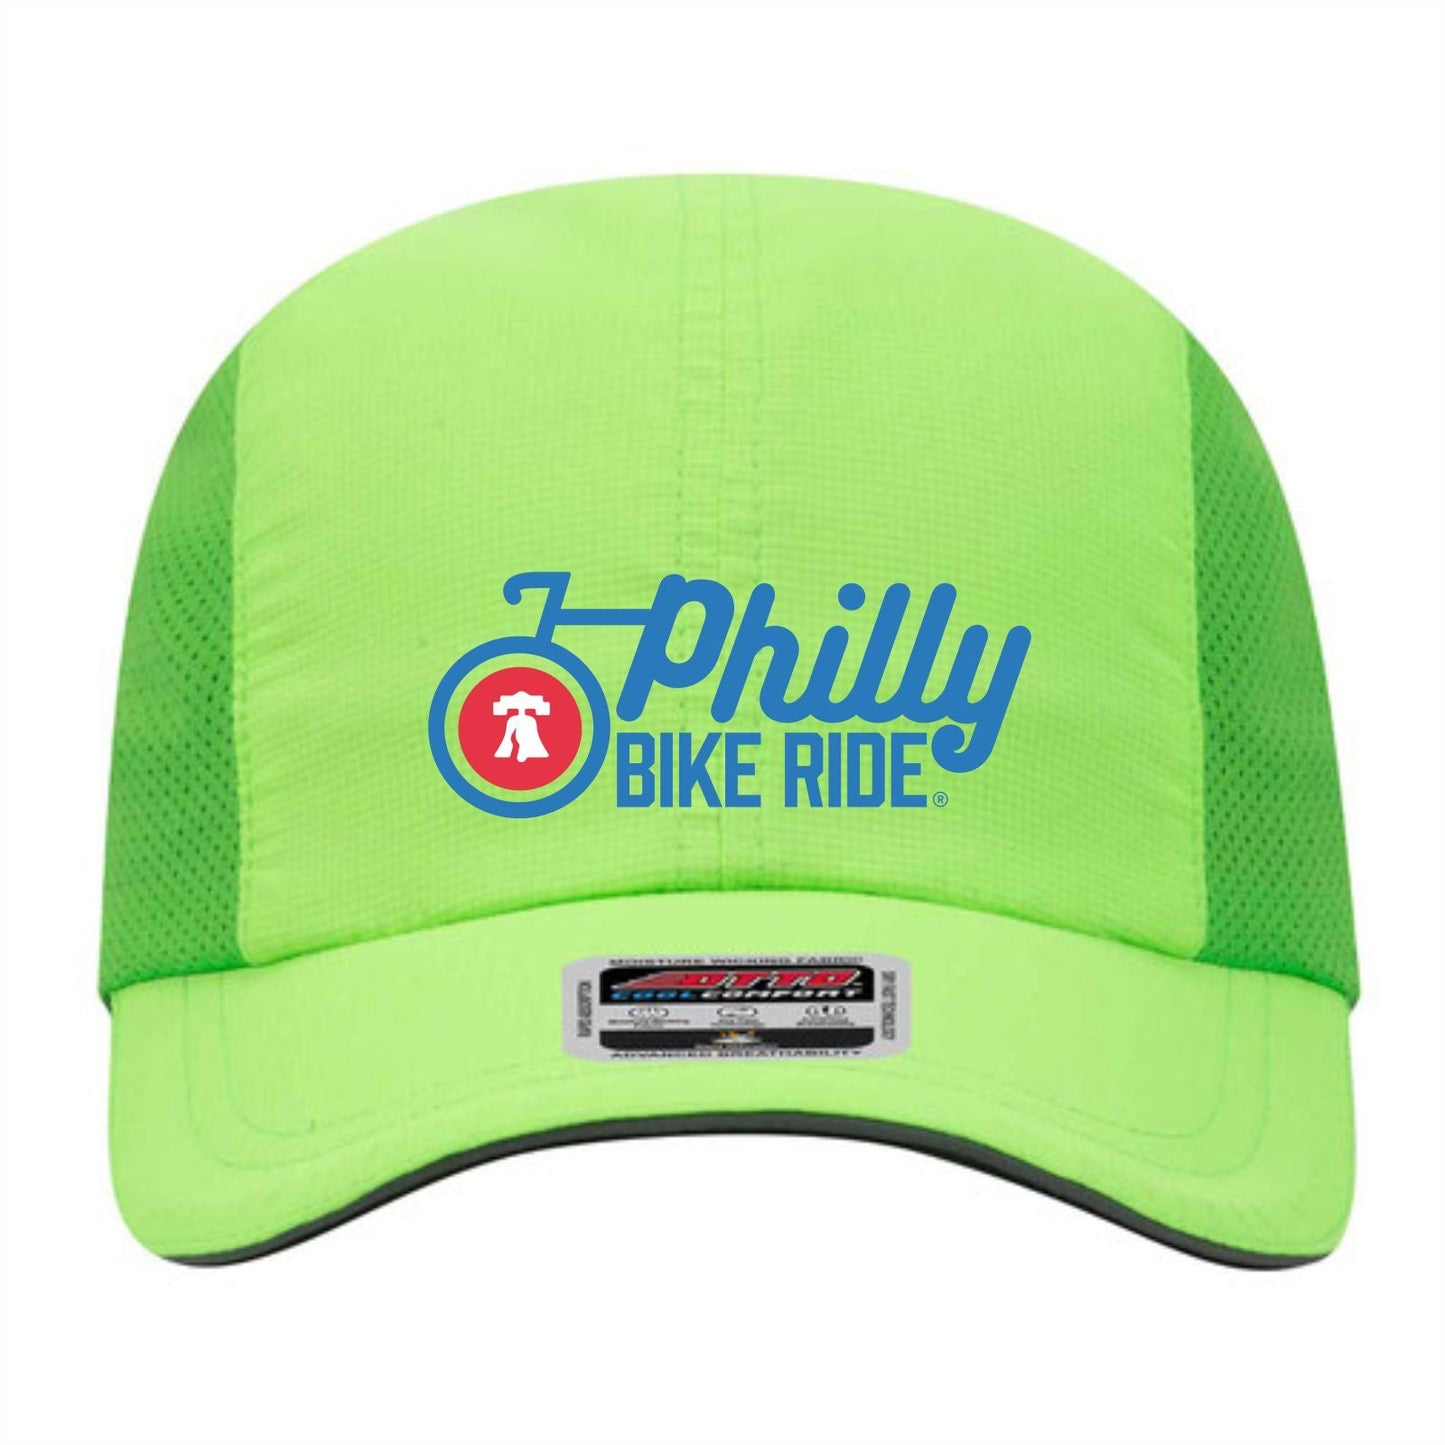 Philly Bike Ride Tech Cap -Neon Green- Embroidered Logo